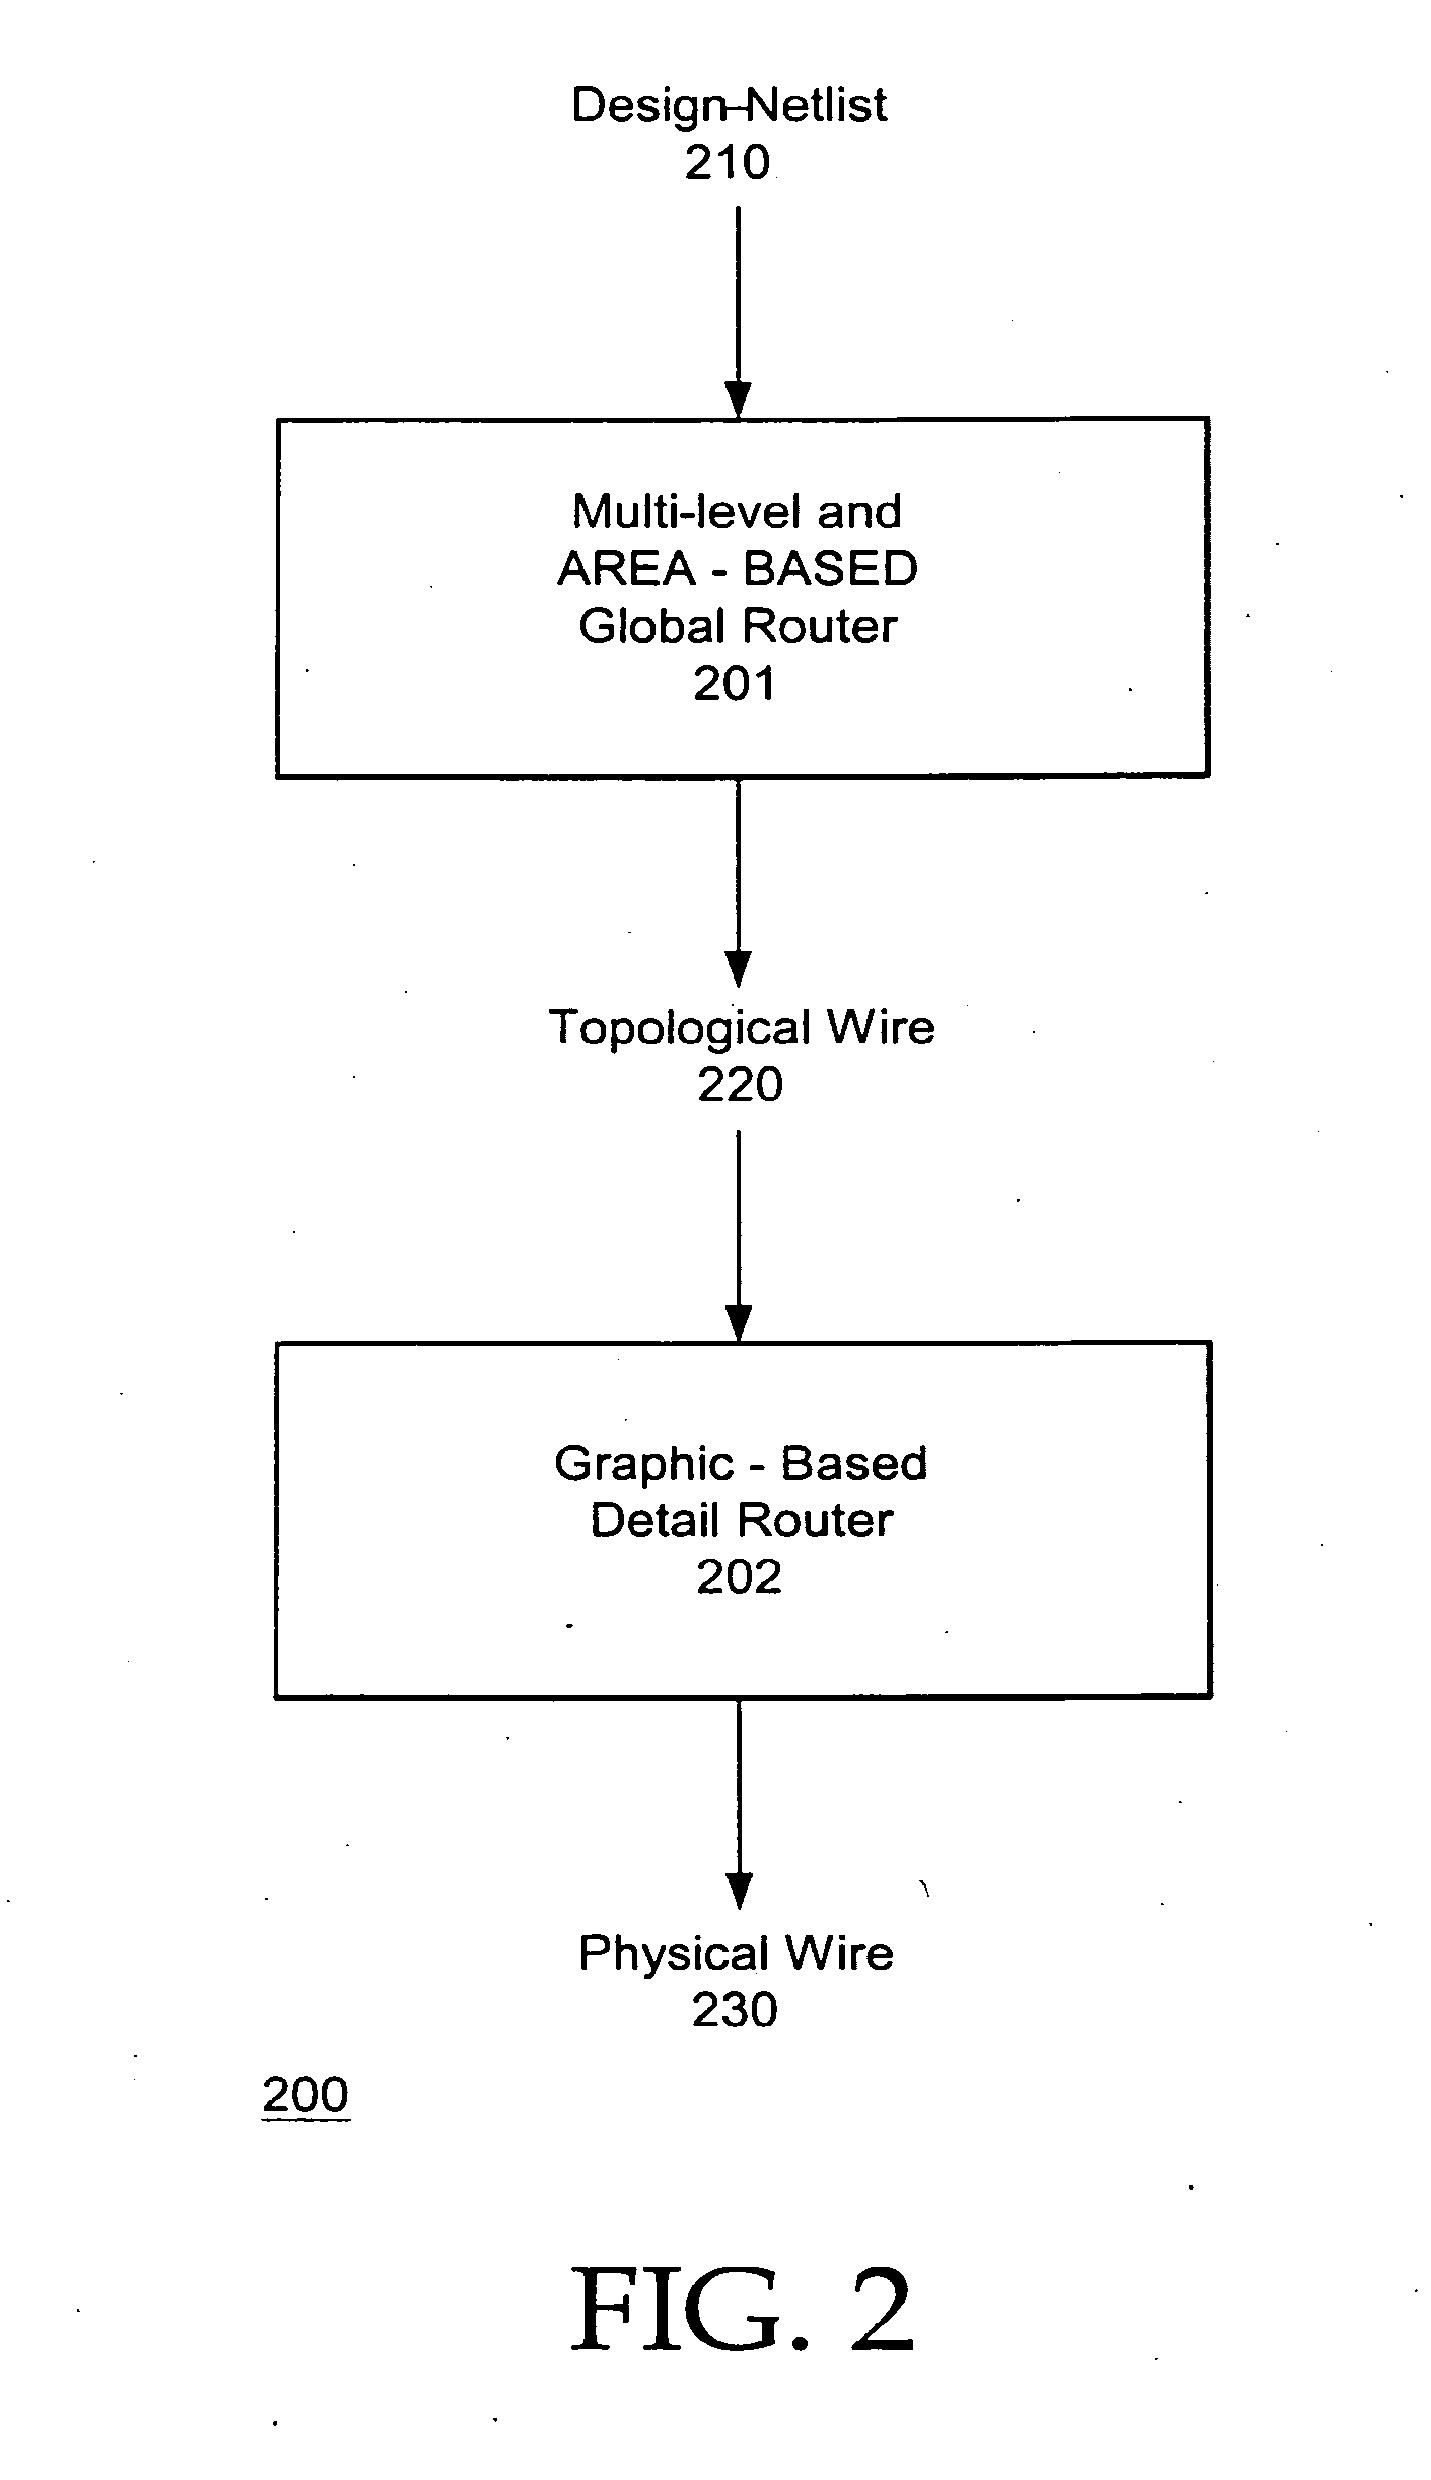 Routing interconnect of integrated circuit designs with varying grid densities